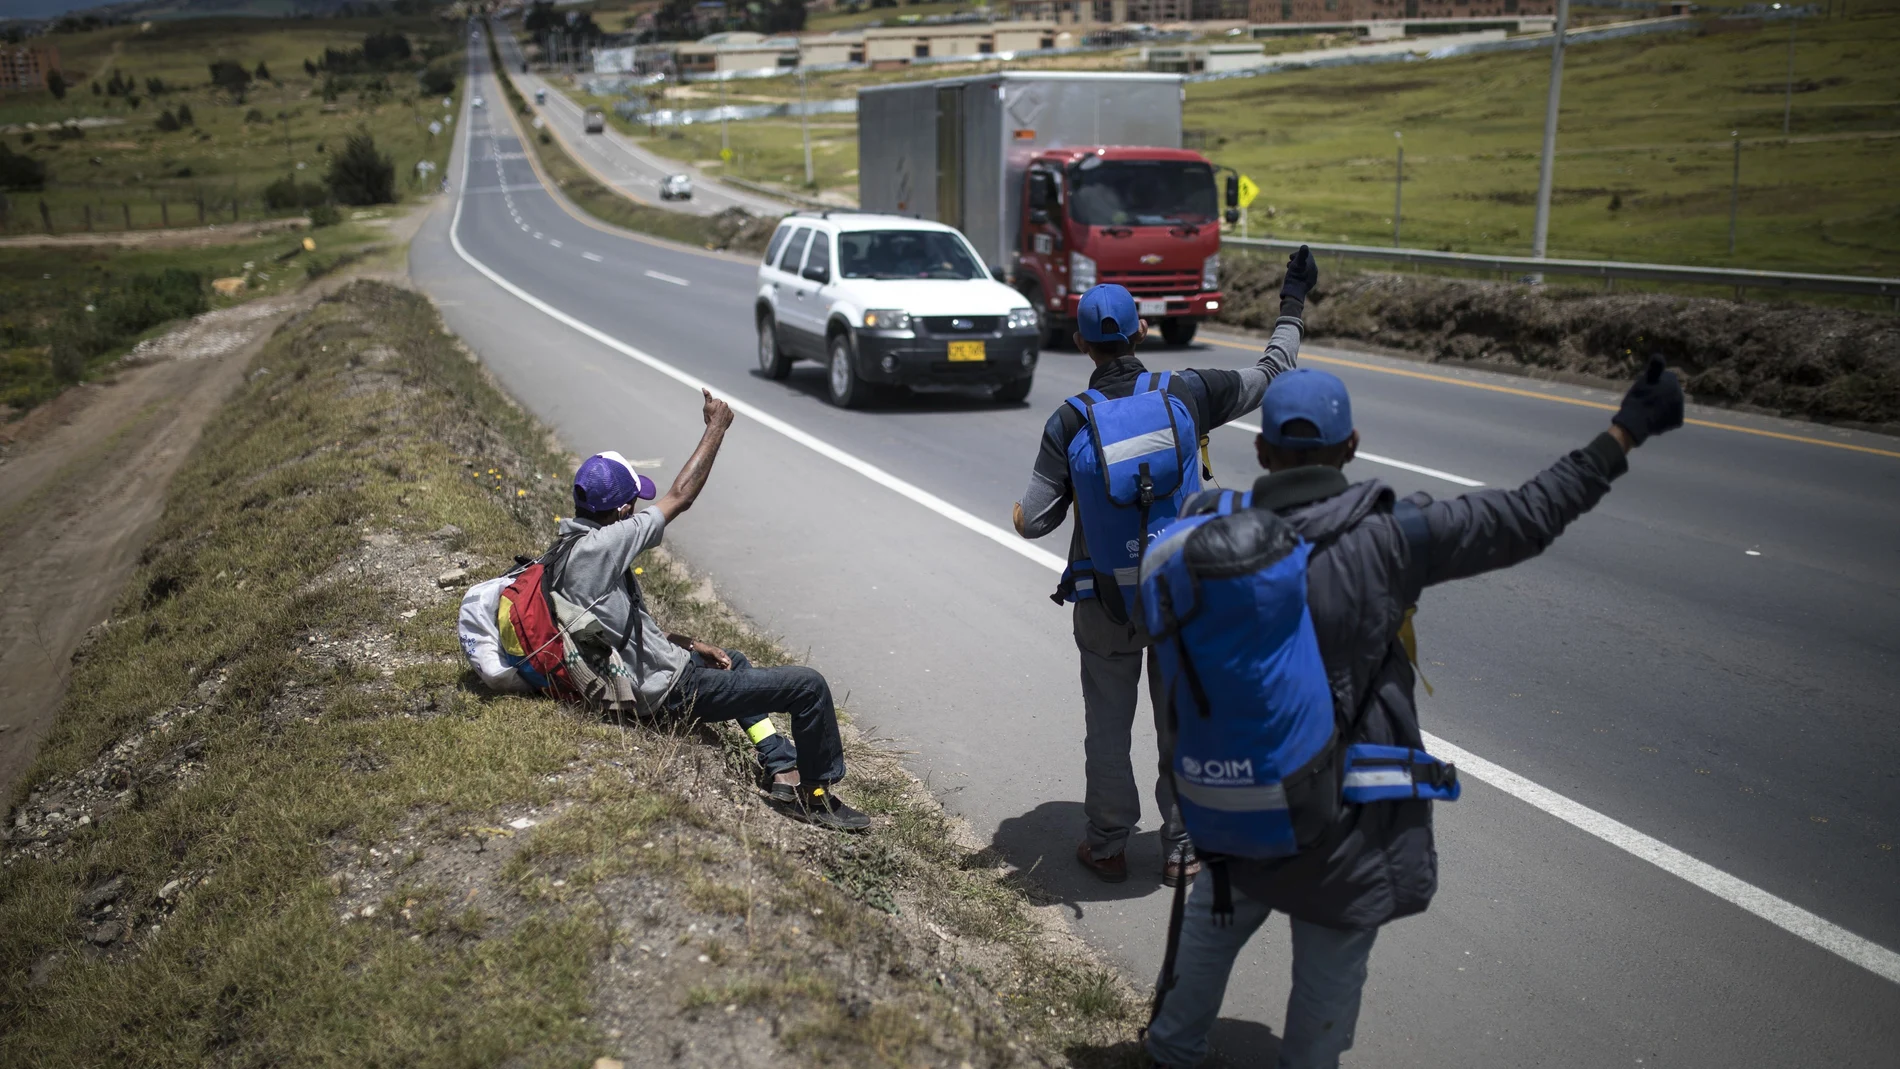 Venezuelan migrants hitchhike towards the capital, in Tunja, Colombia, Tuesday, Oct. 6, 2020. Amid COVID-19, drivers are more reluctant to pick up hitchhikers, shelters remain closed, and locals who fear contagion are less likely to help out with food donations. (AP Photo/Ivan Valencia)